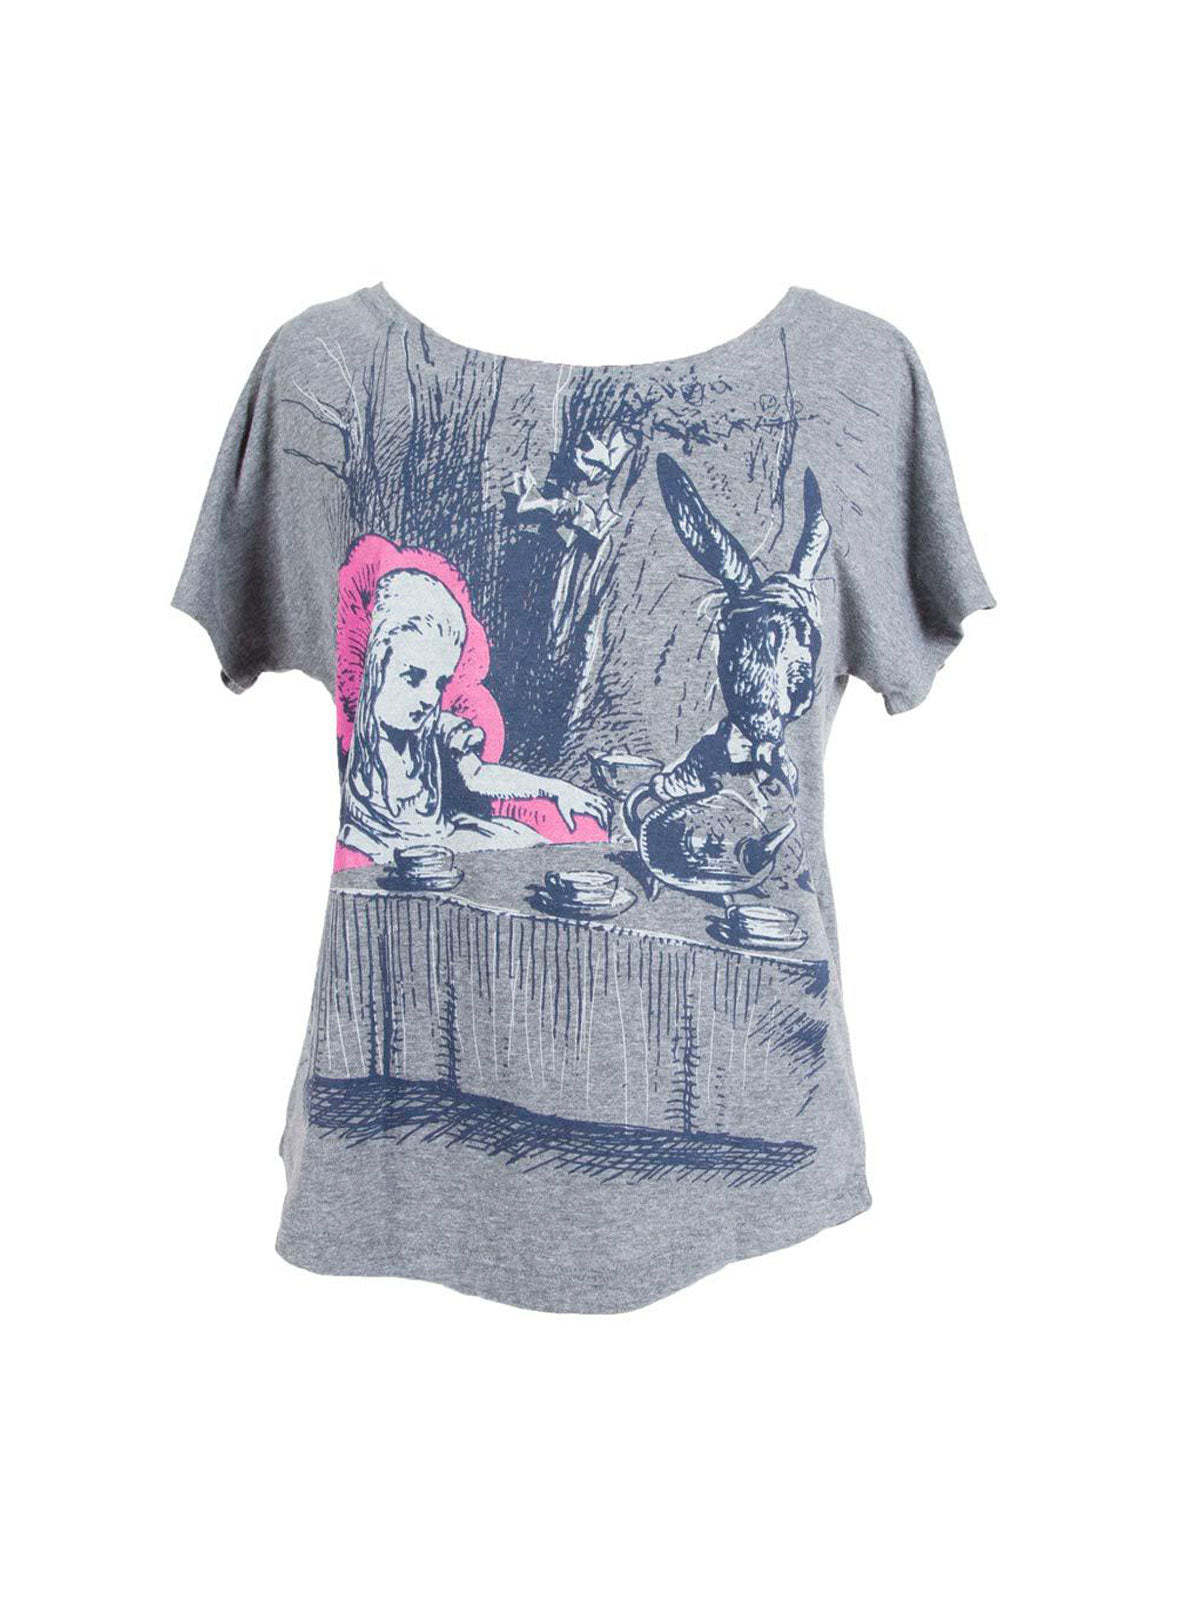 Alice in Wonderland women's book t-shirt — Out of Print